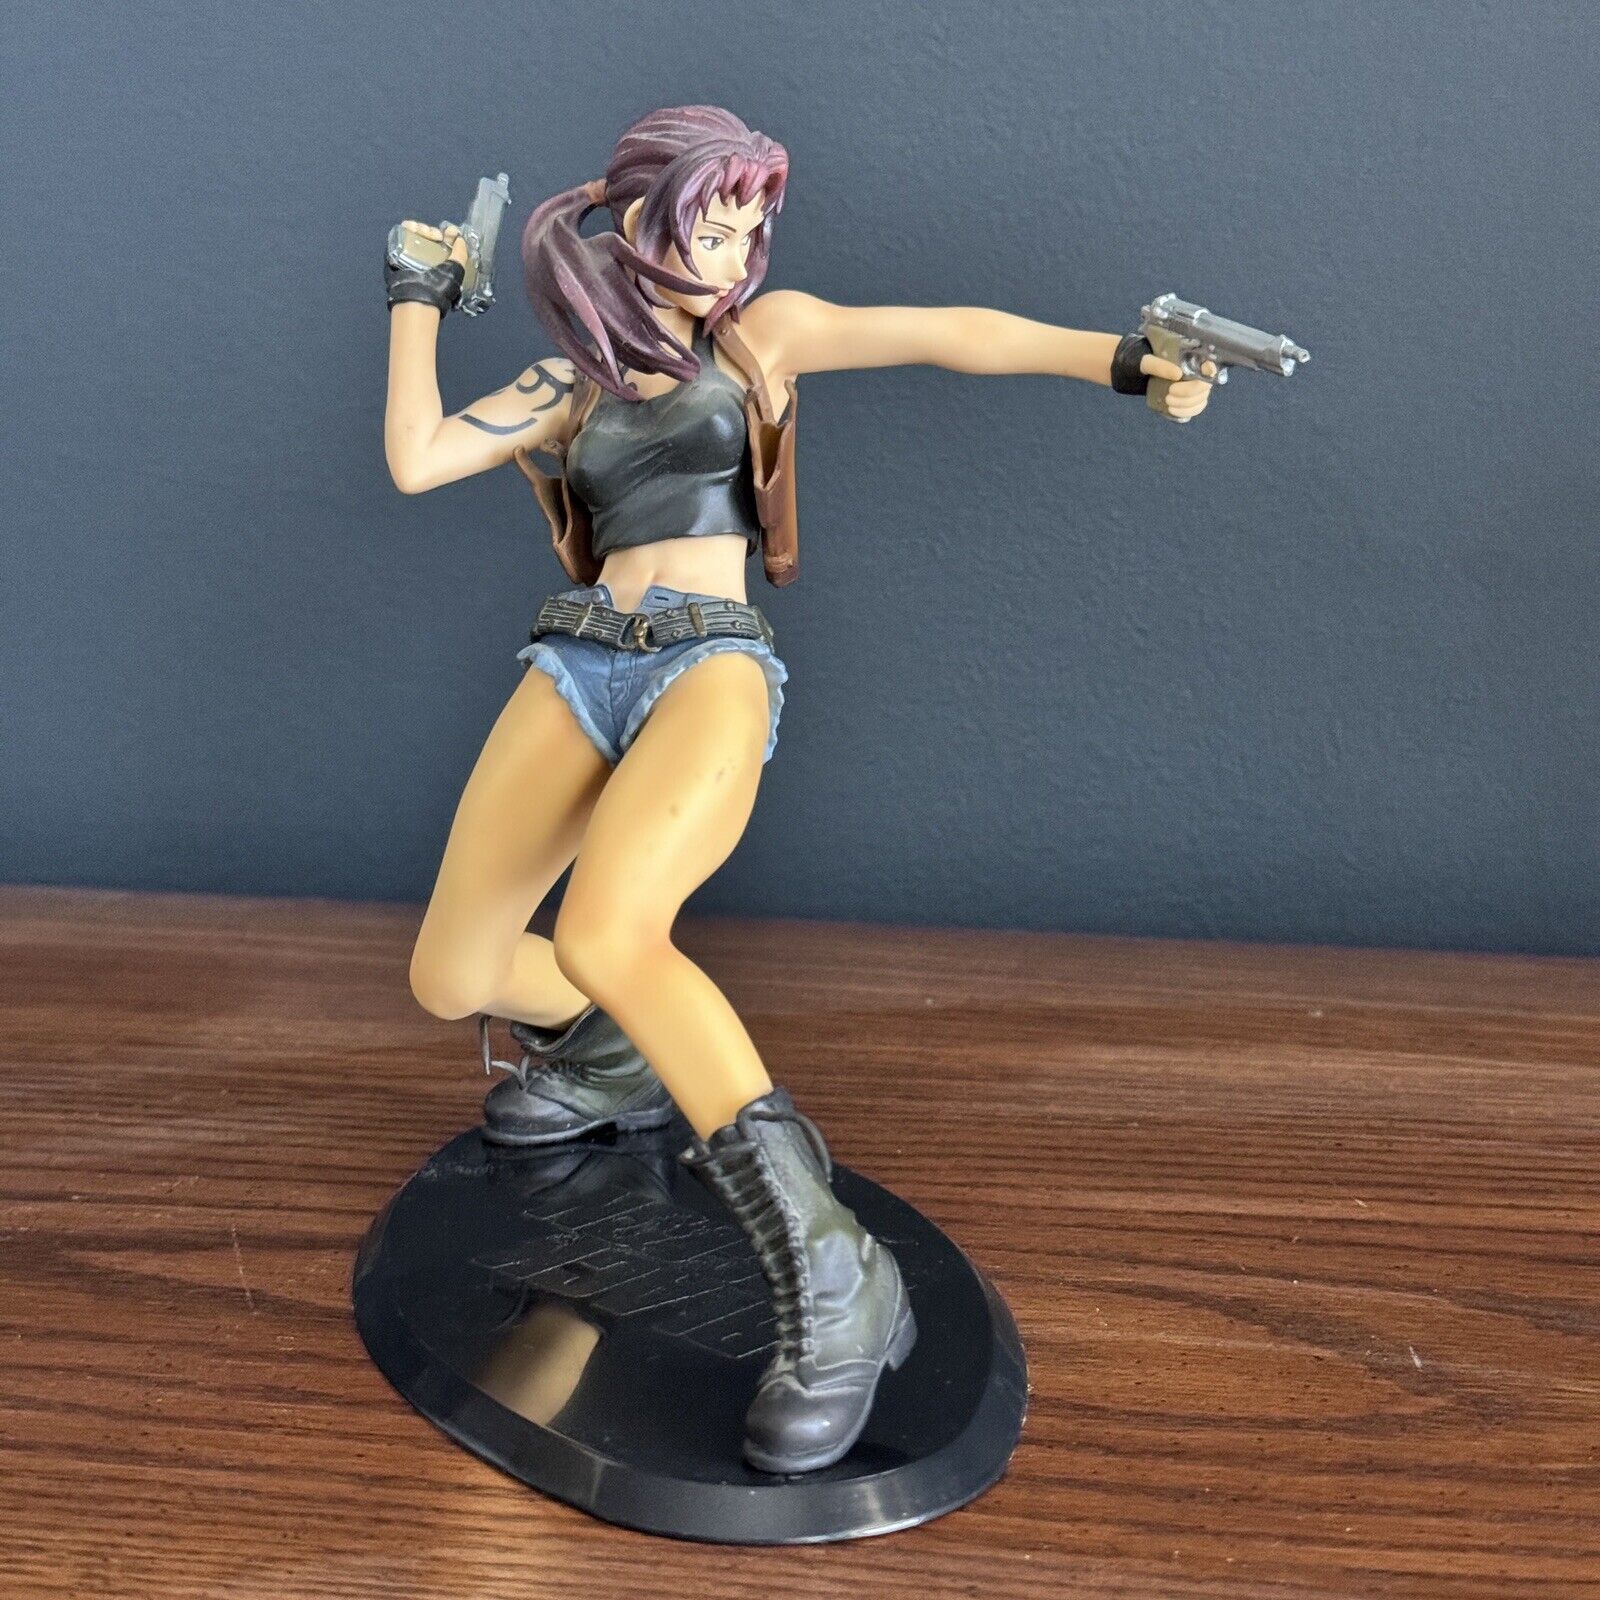 Black Lagoon Revy Figure by Alter - 175mm, 1:8 Scale Anime Manga Characte